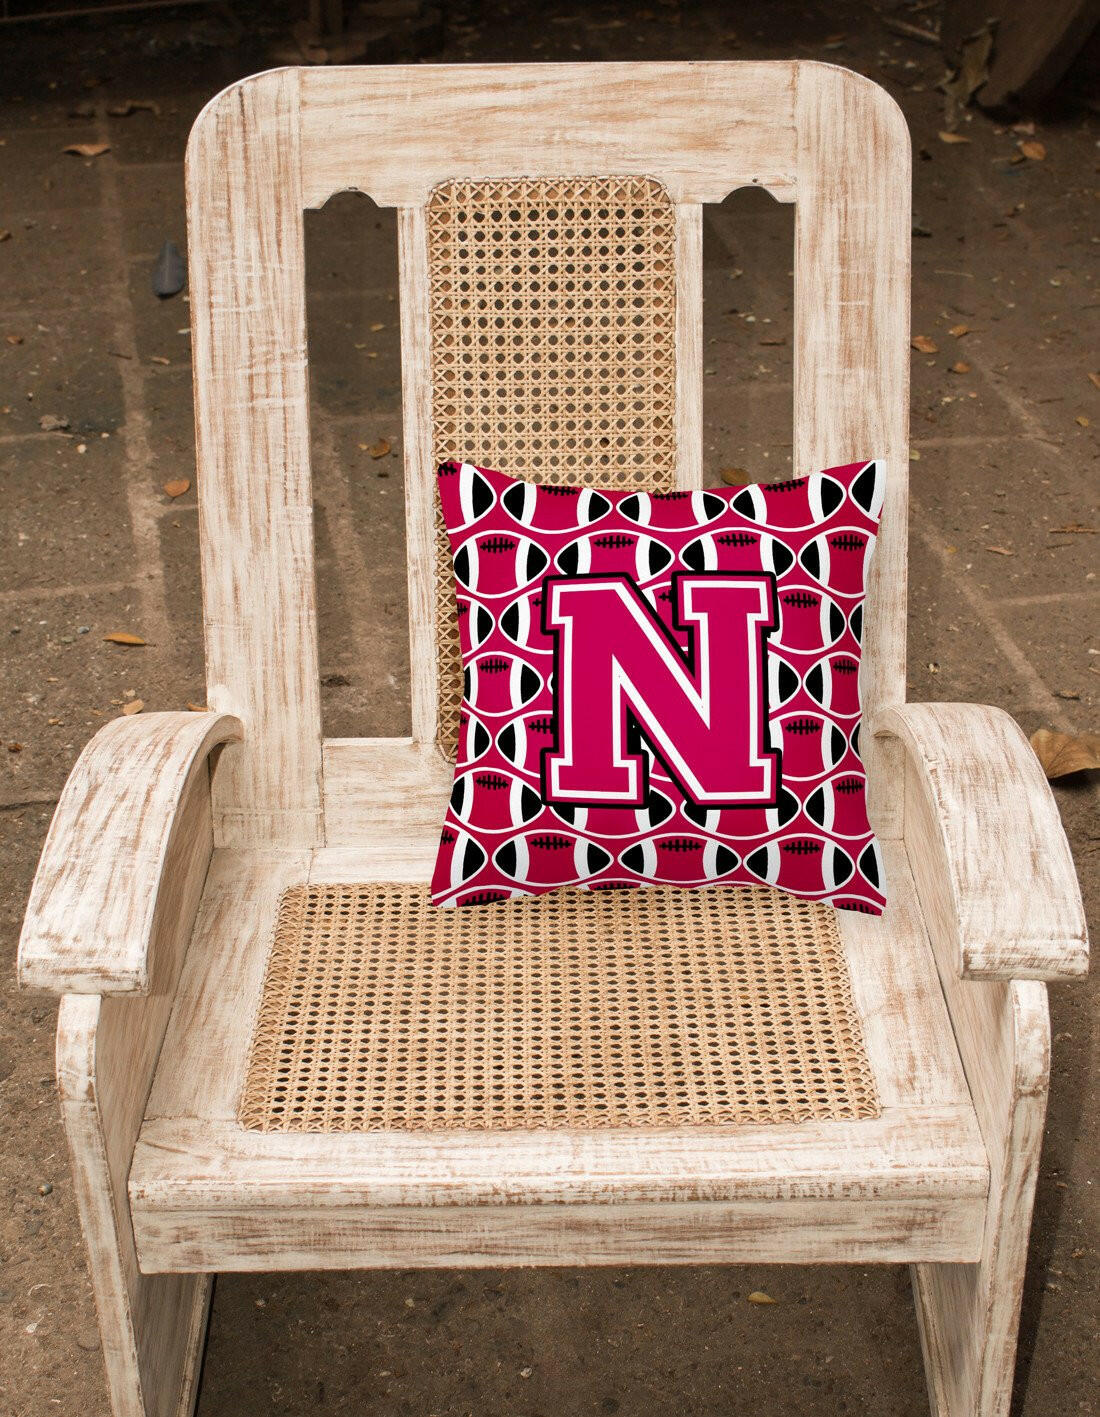 Letter N Football Crimson and White Fabric Decorative Pillow CJ1079-NPW1414 by Caroline's Treasures